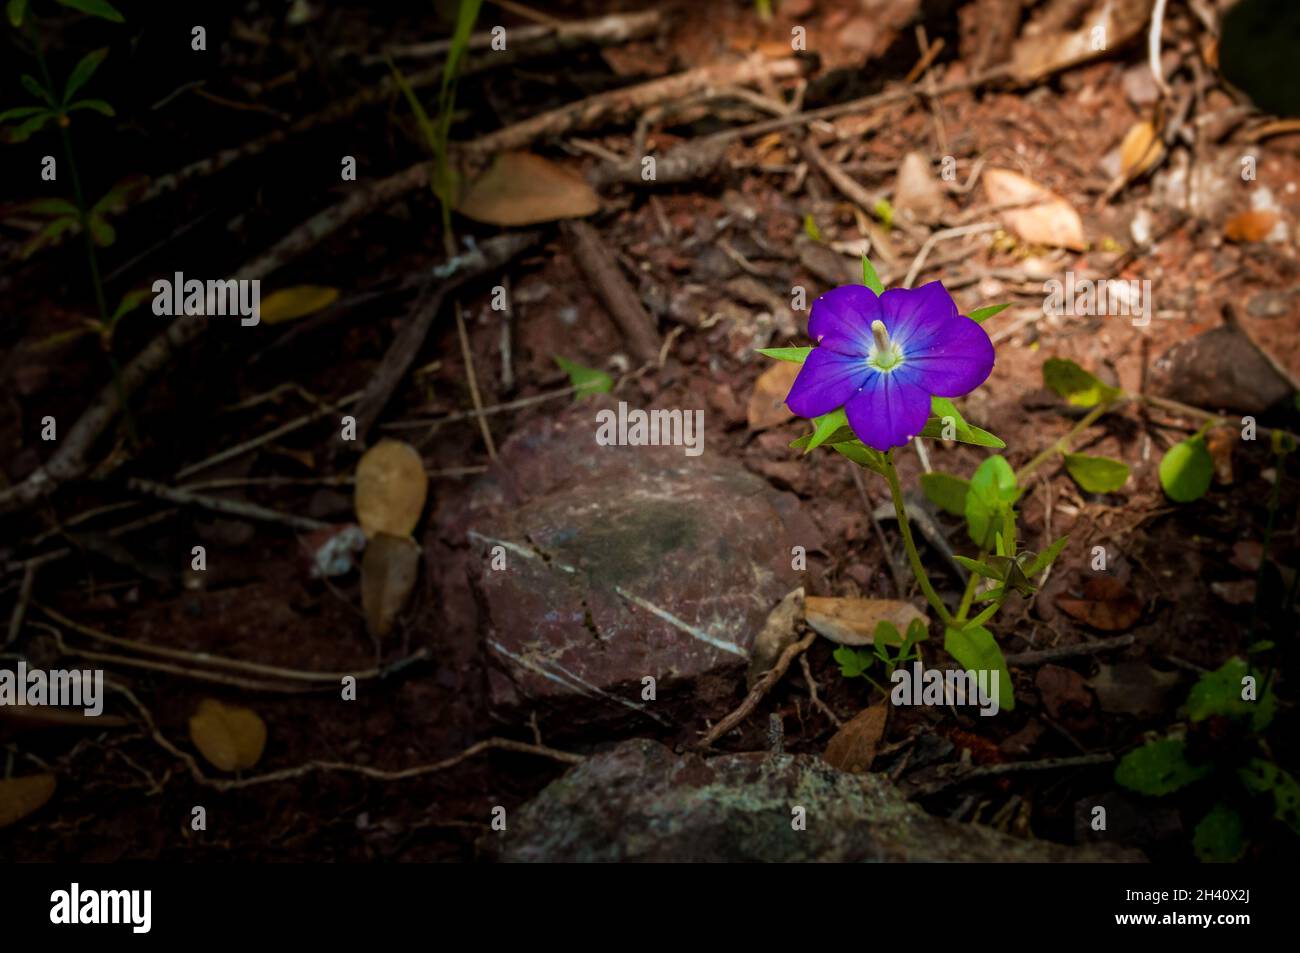 A single purple flower similar to Vinca growing in an arid environment Stock Photo